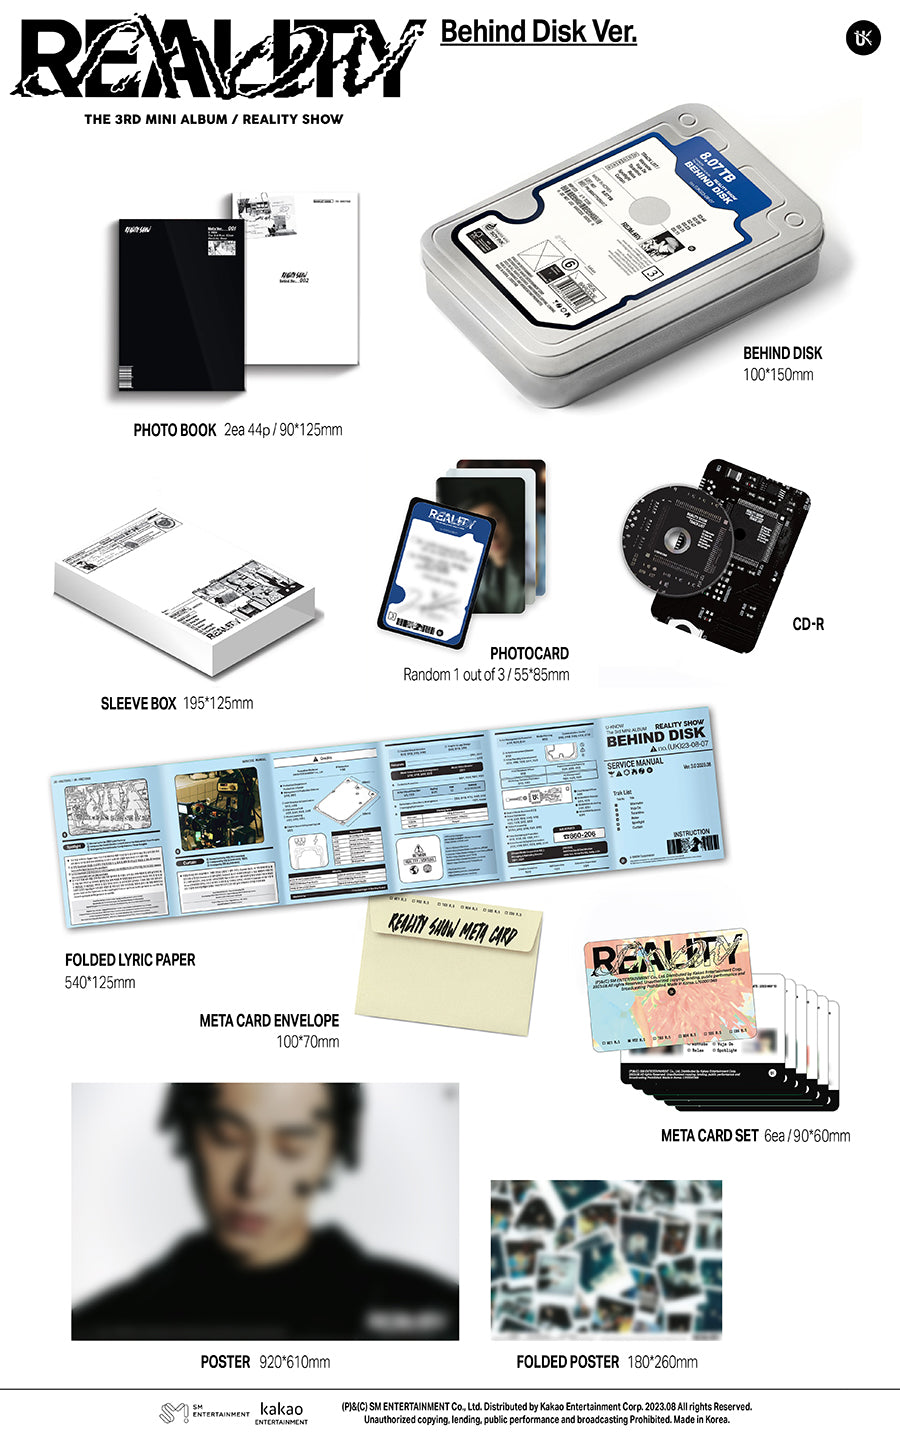 U-KNOW 3RD MINI ALBUM 'REALITY SHOW' BEHIND DISK VERSION DETAIL